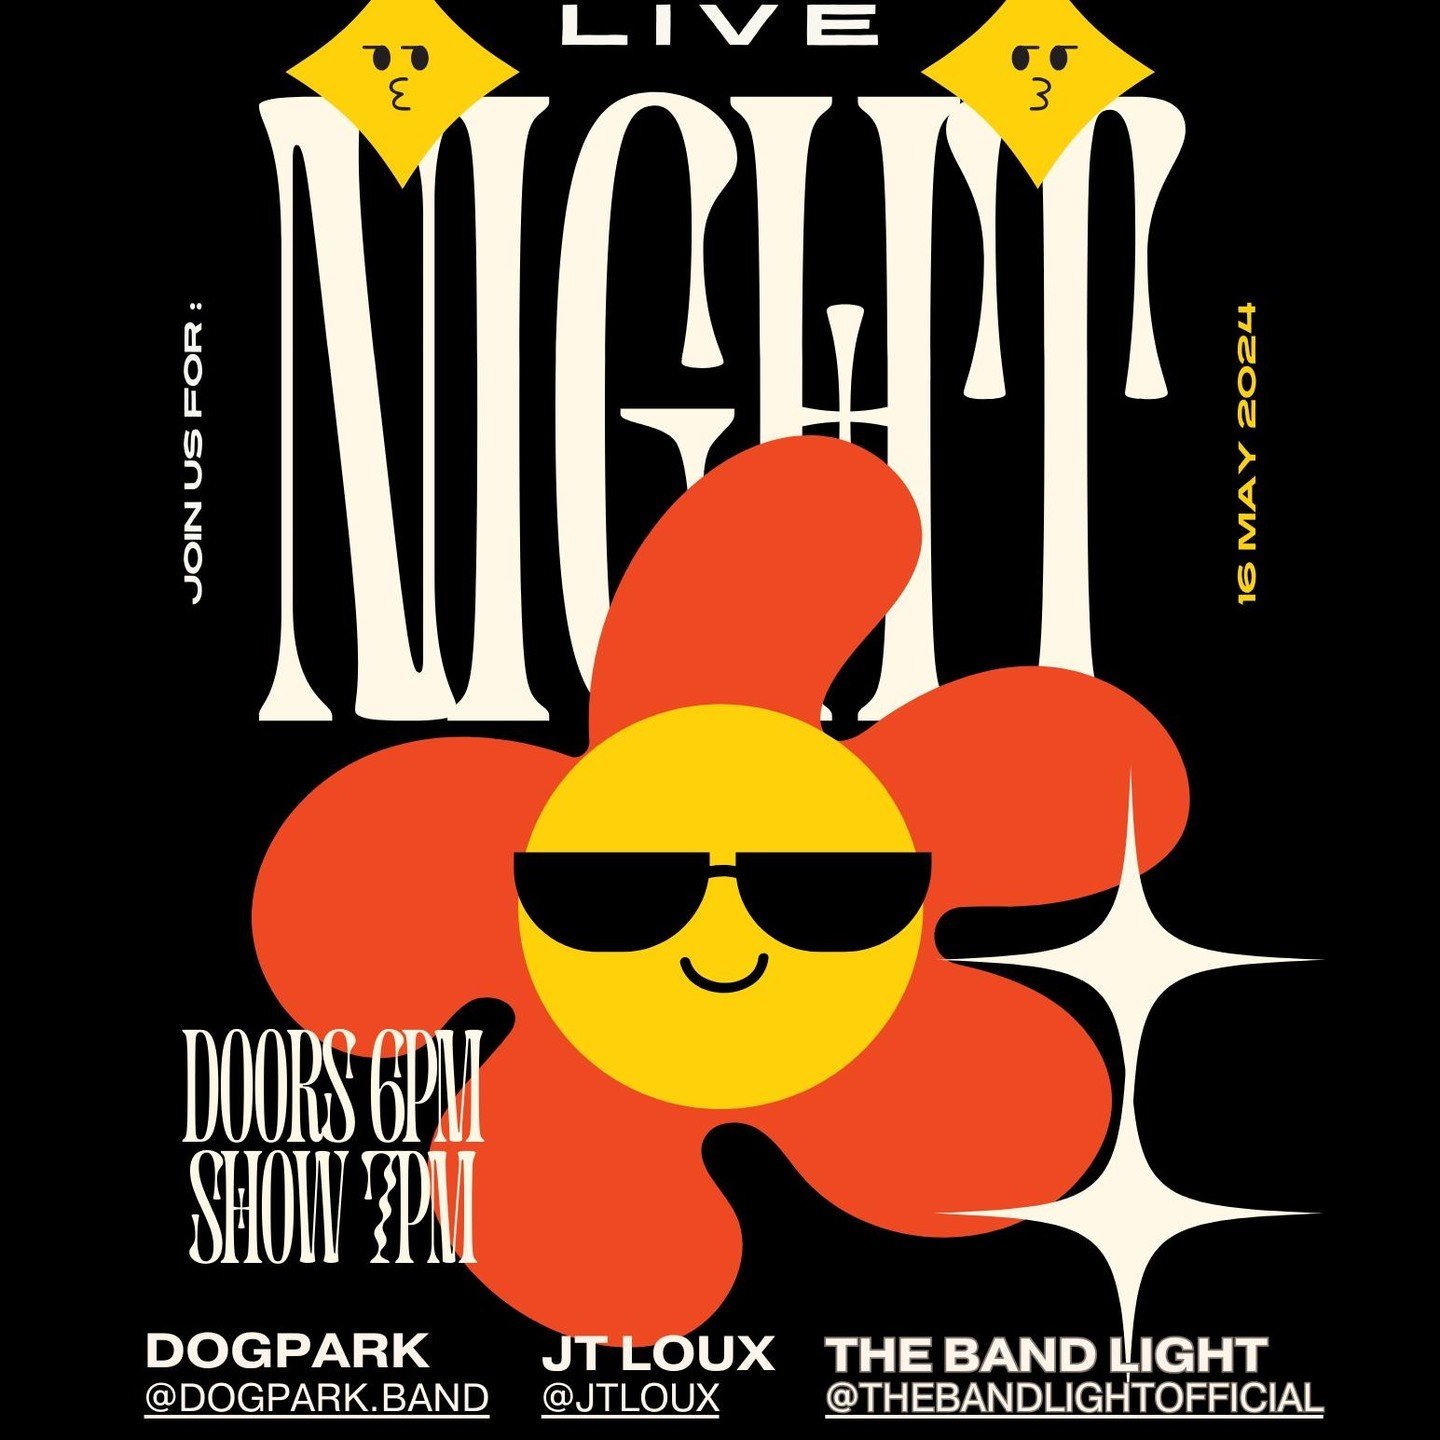 A night of collaboration in music, celebration, and new talent! @thebandlightofficial joins @dogpark.band and @JTLOUX on May 16th for an unforgettable night. 

Nashville, come support!
#MusicBiz #EastIrisLive